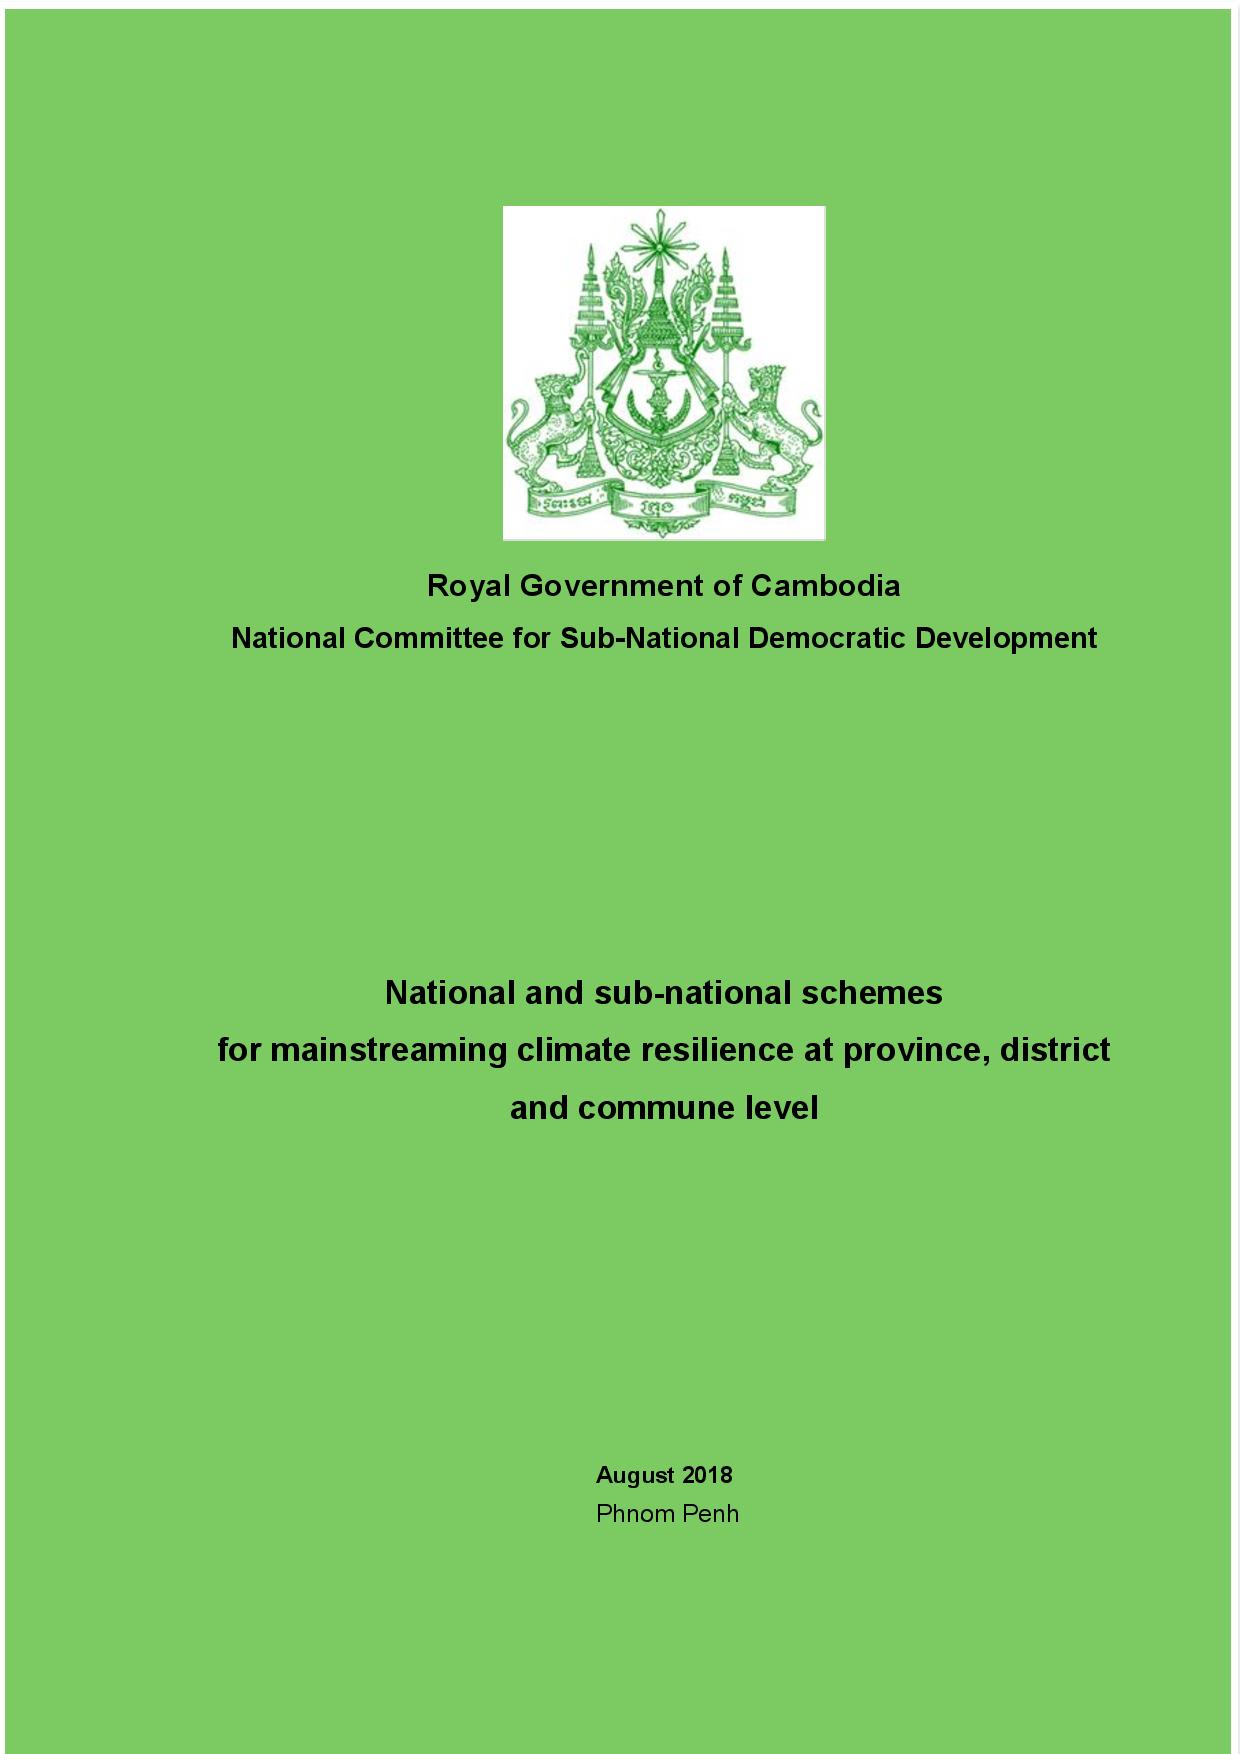 National and Sub-national Schemes for Mainstreaming Climate Resilience at Province, District and Commune Level